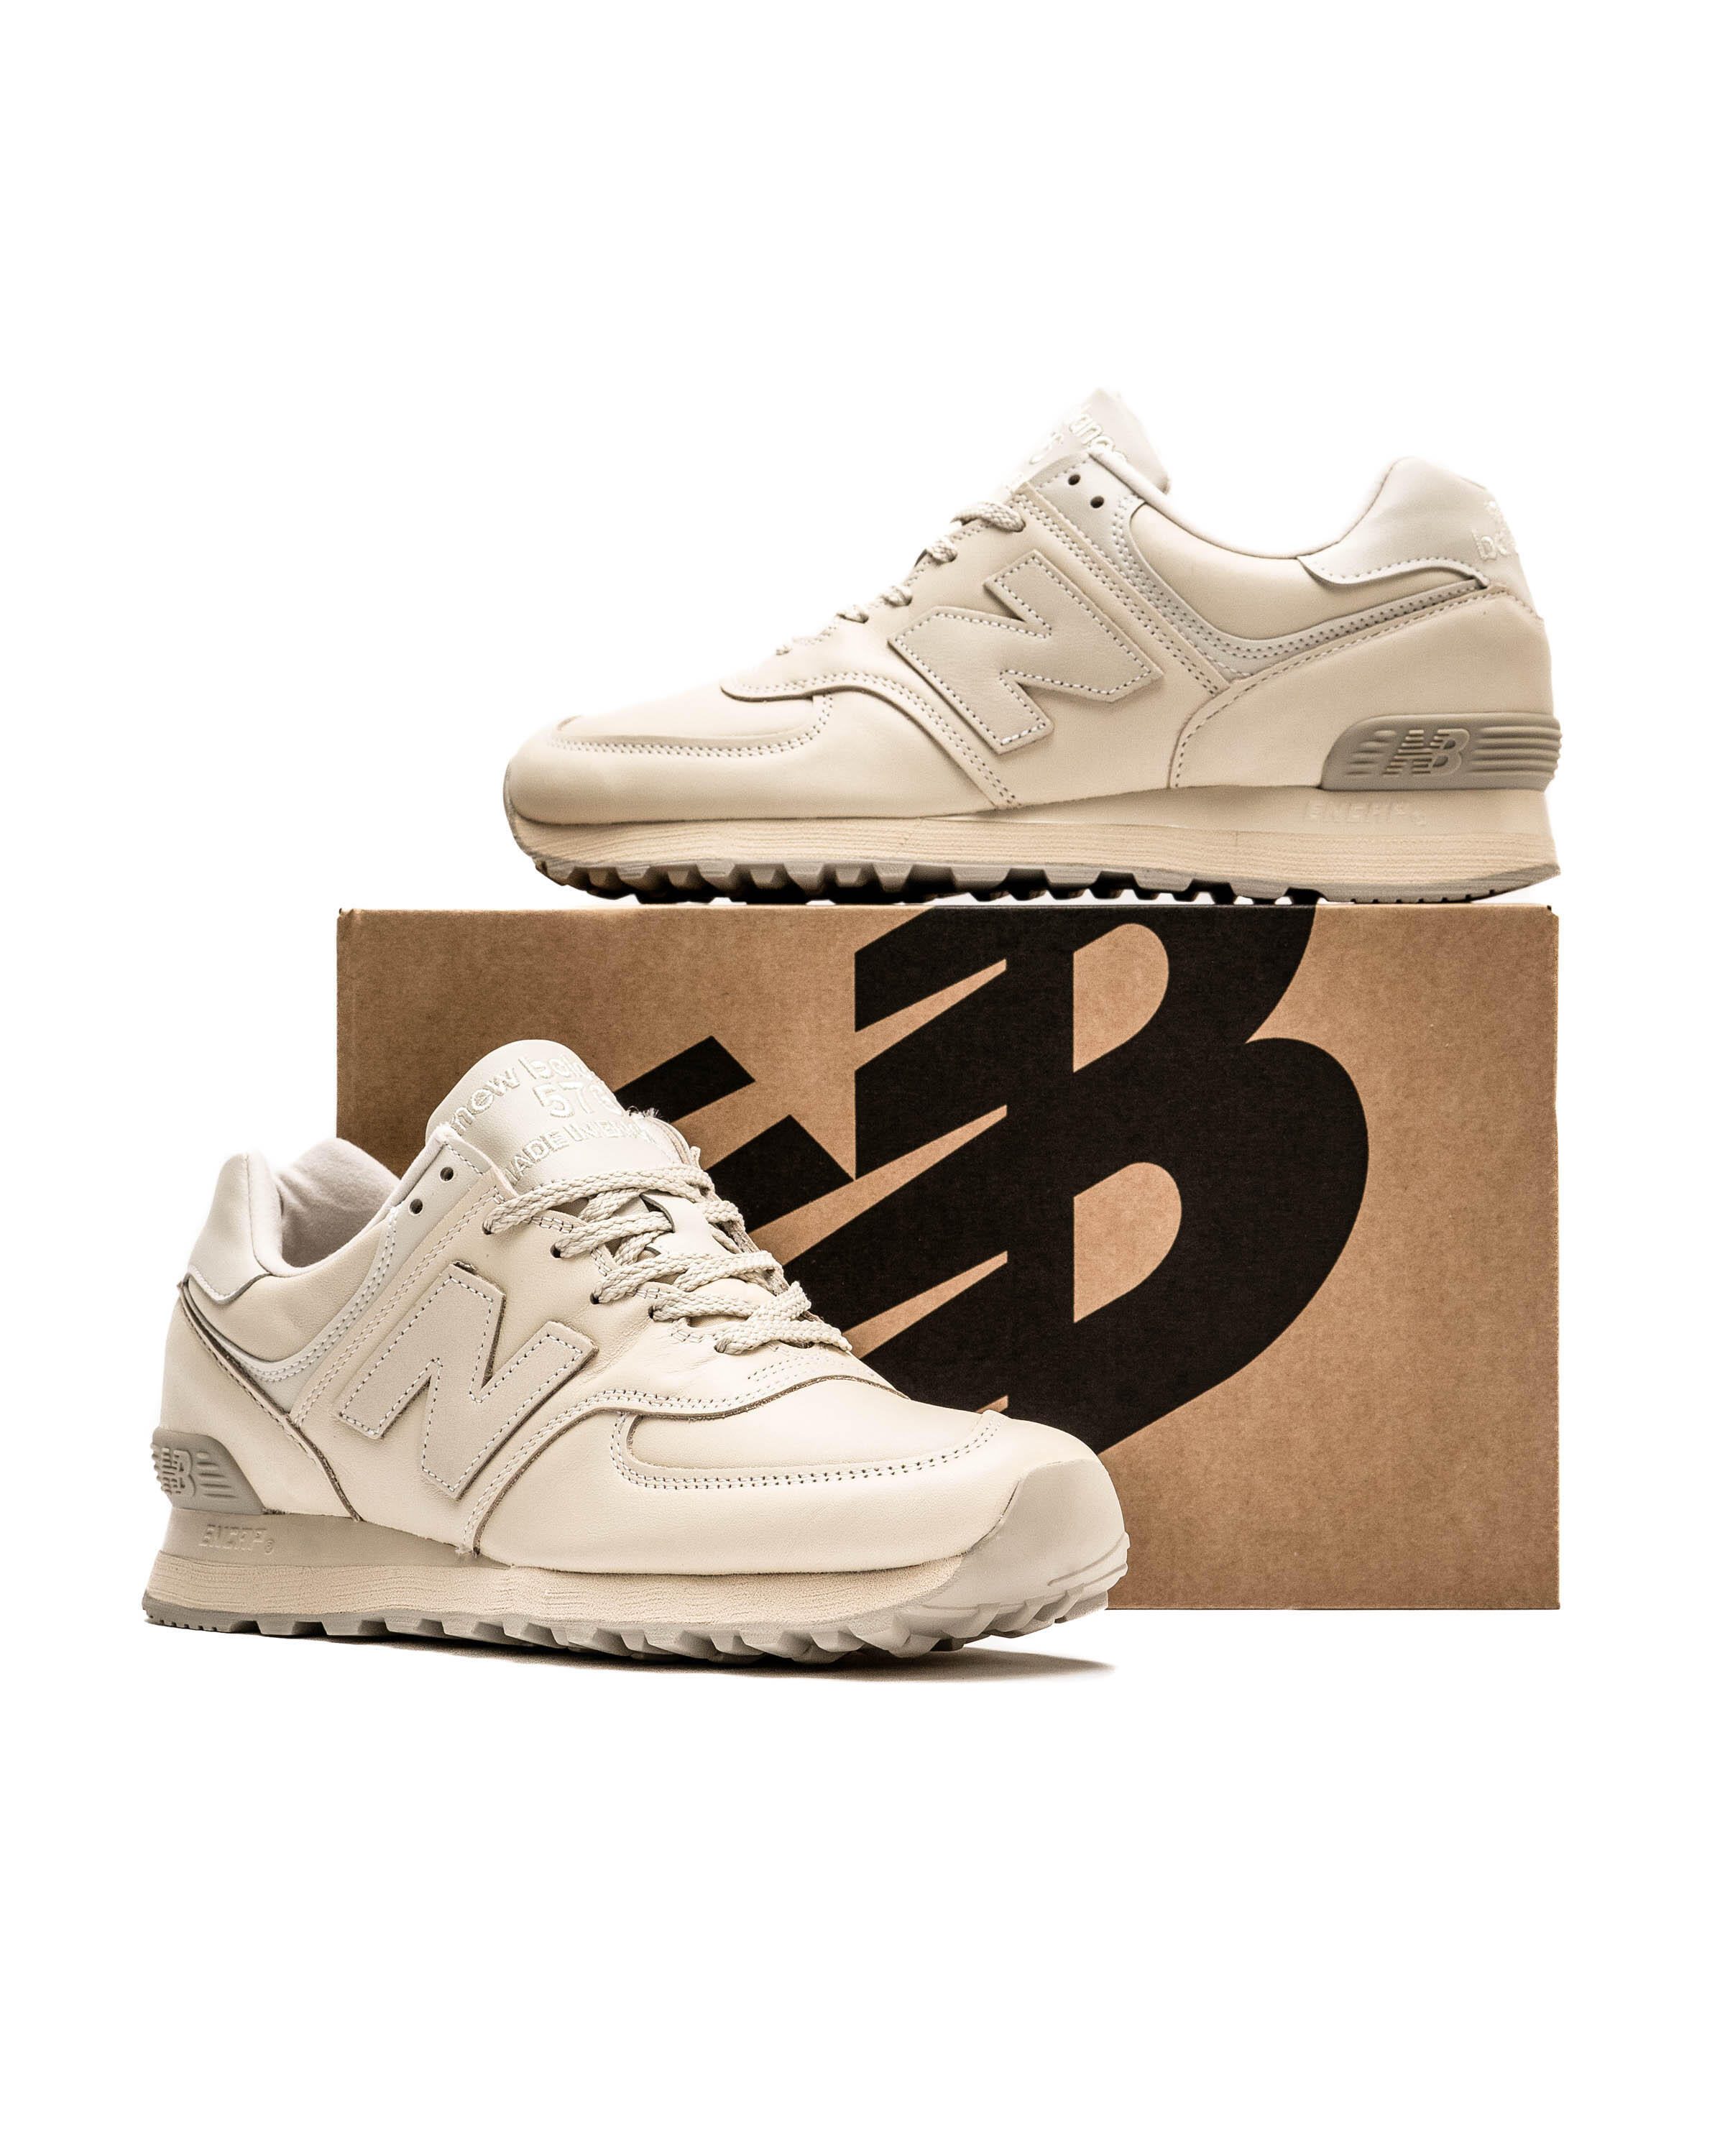 New Balance OU 576 OW - Made in England